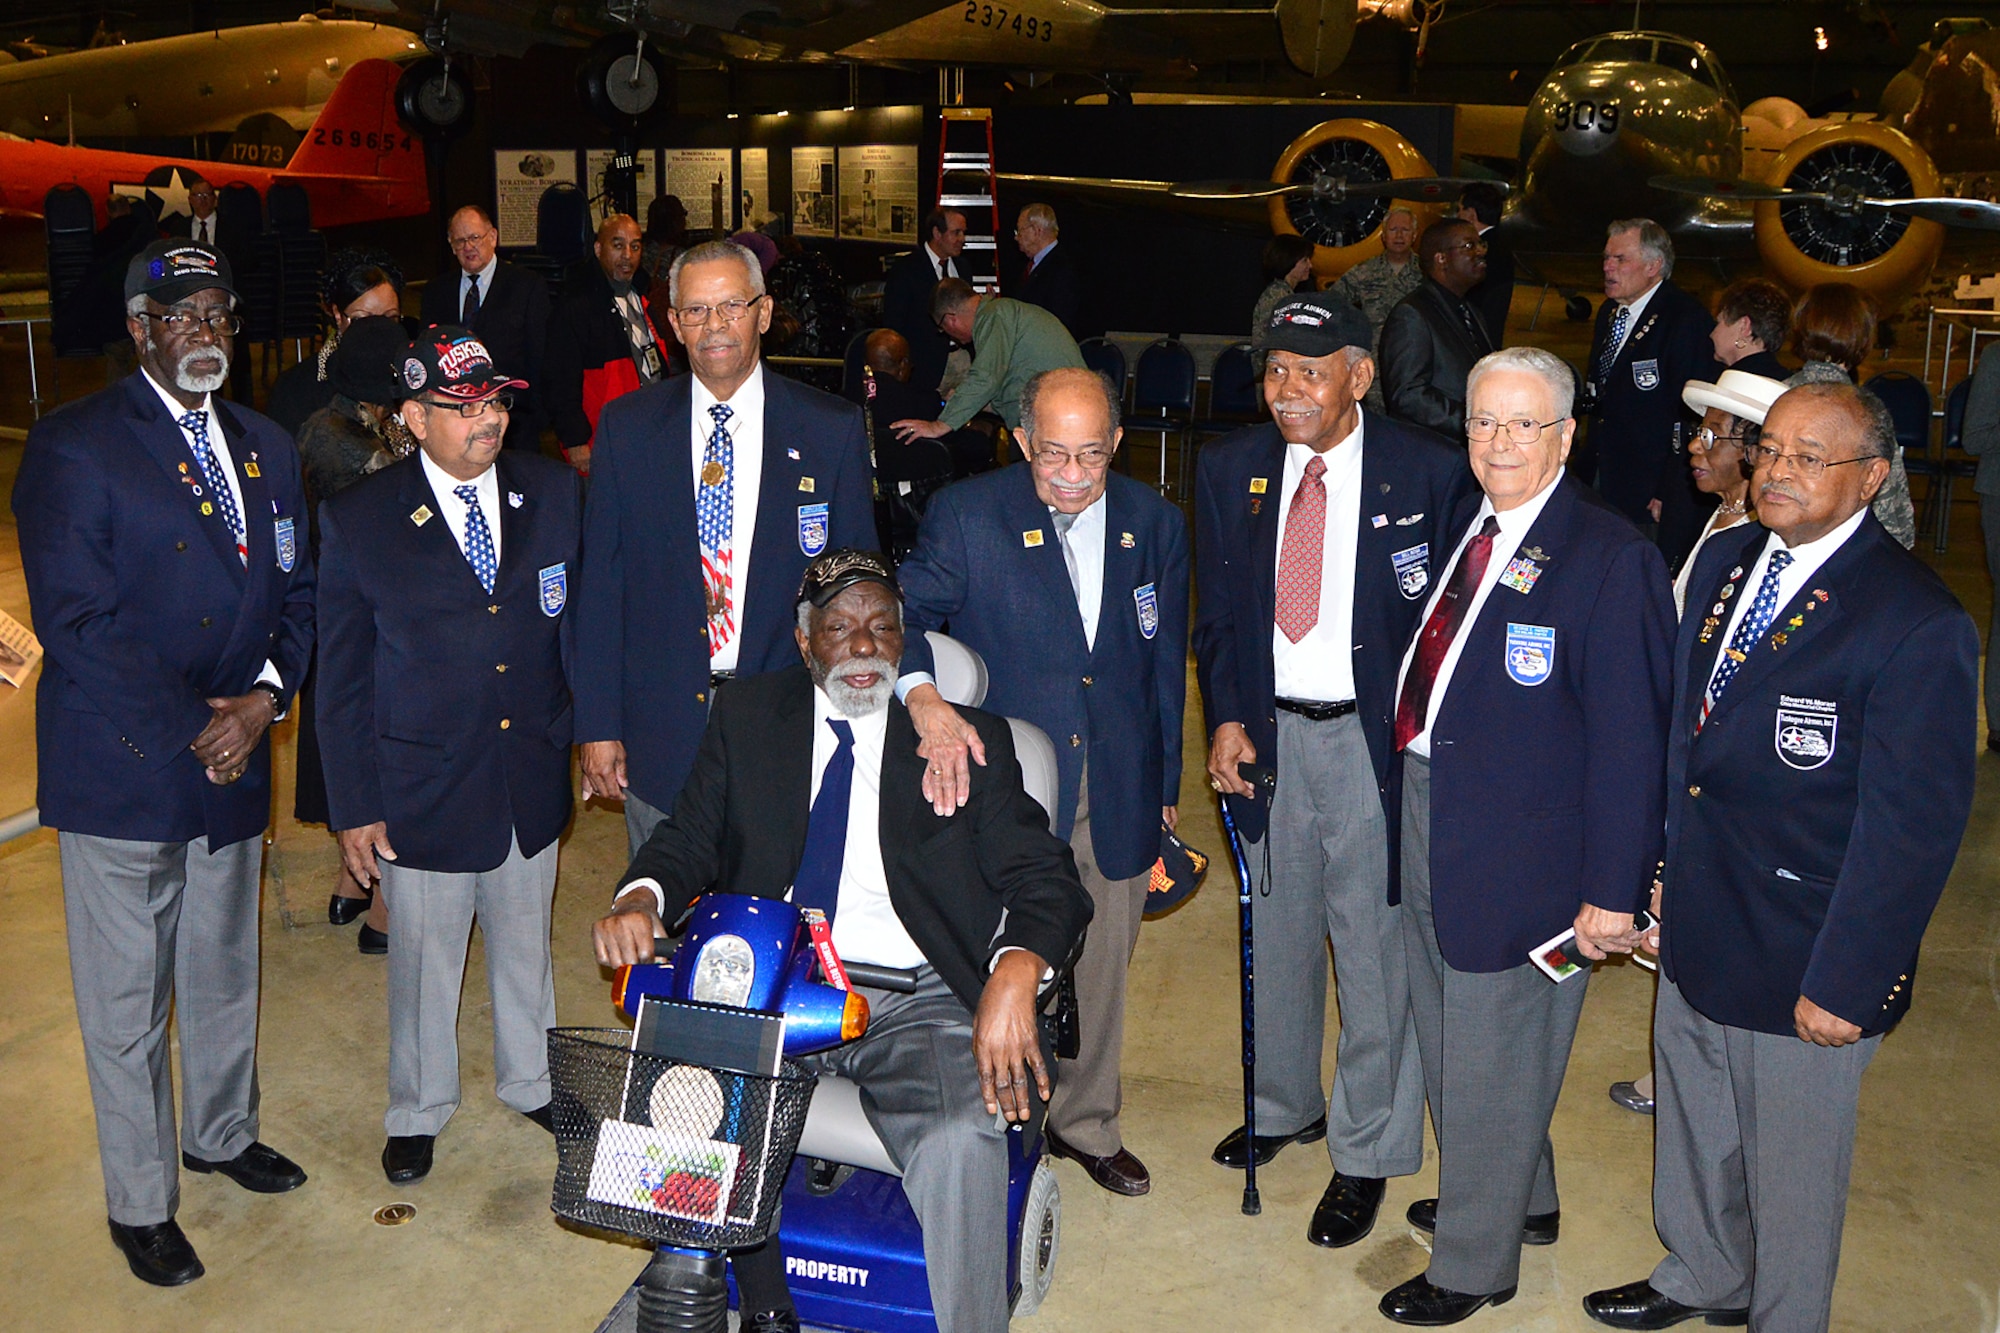 DAYTON, Ohio -- Tuskegee Airmen and Honorary Tuskegee Airmen gathered for photographs at the  expanded Tuskegee Airmen exhibit opening in the WWII Gallery at the National Museum of the U.S. Air Force on Feb. 10, 2015. (U.S. Air Force photo)


